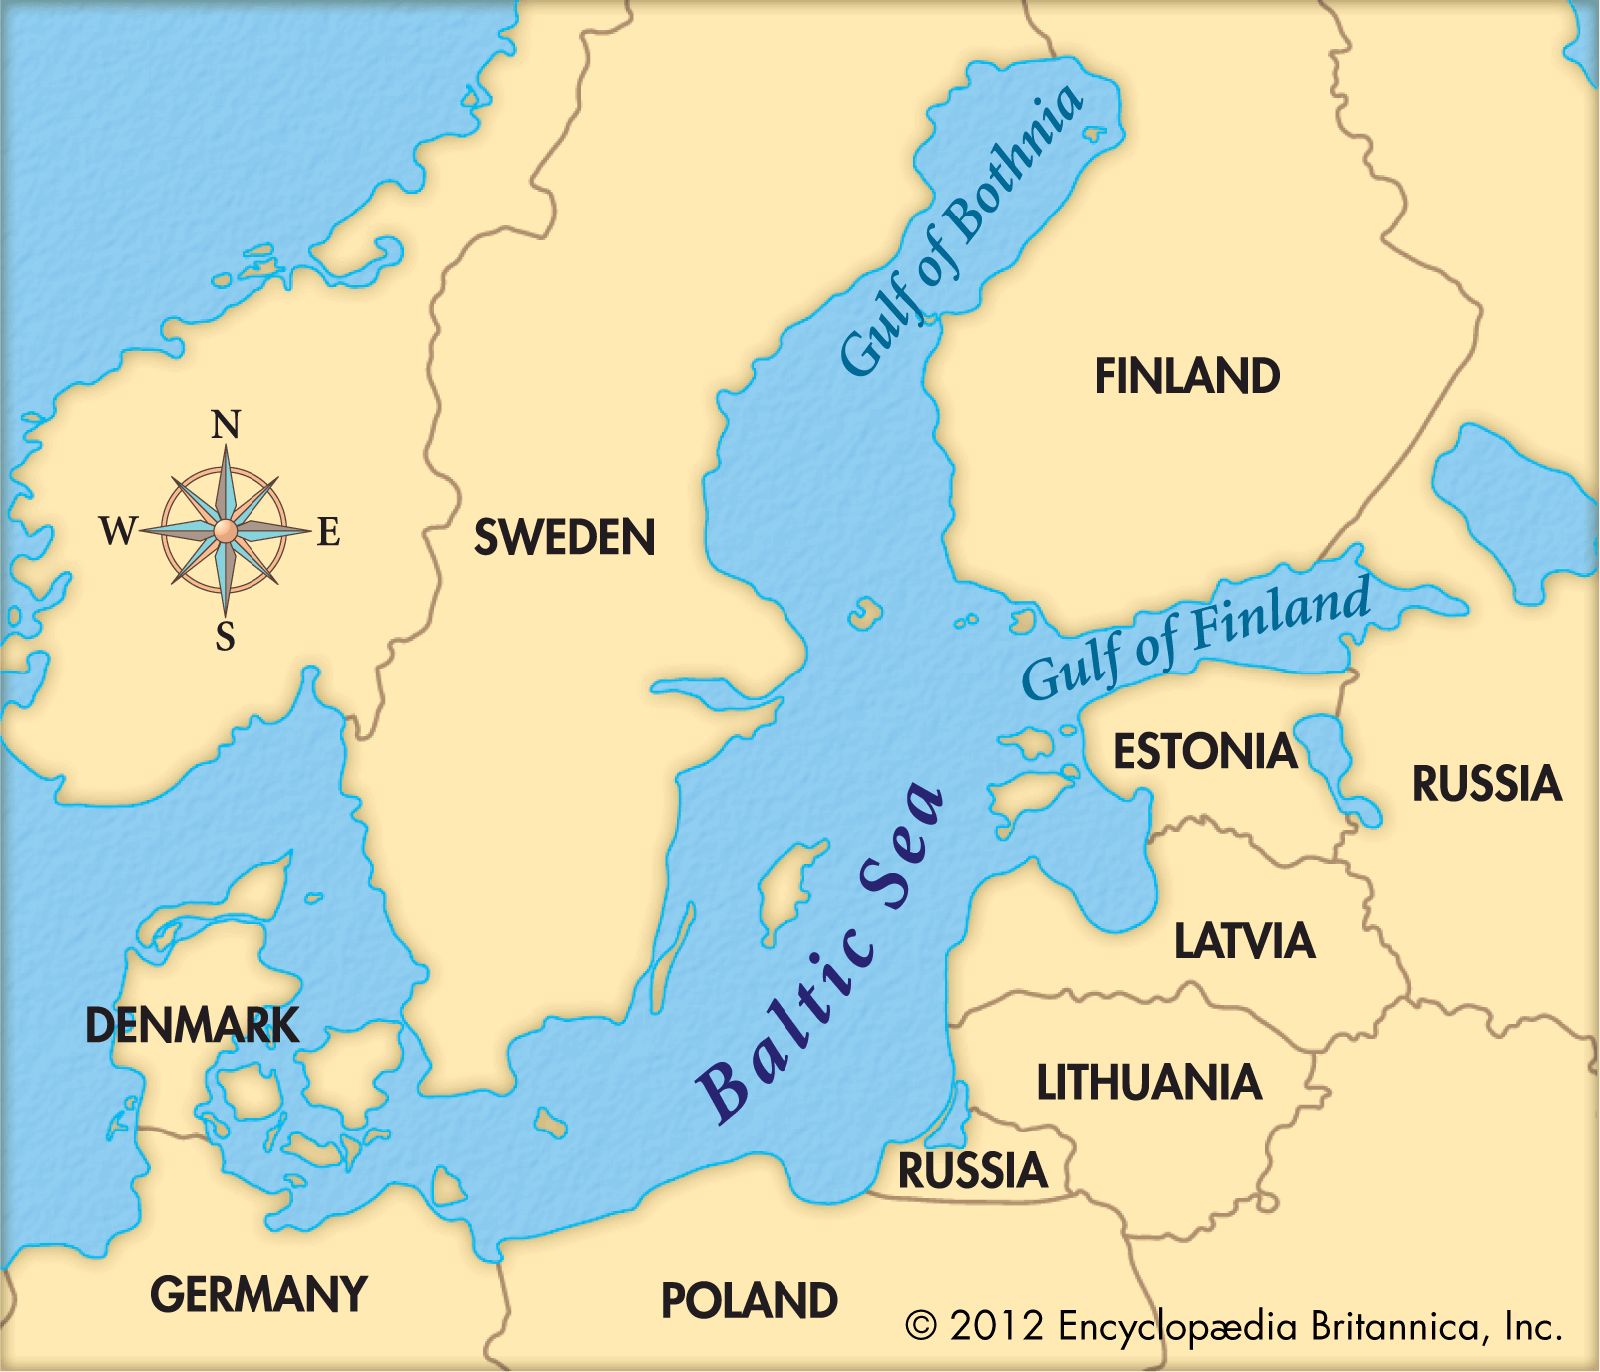 BalticSea Picture Maps Map Of The Baltic States 